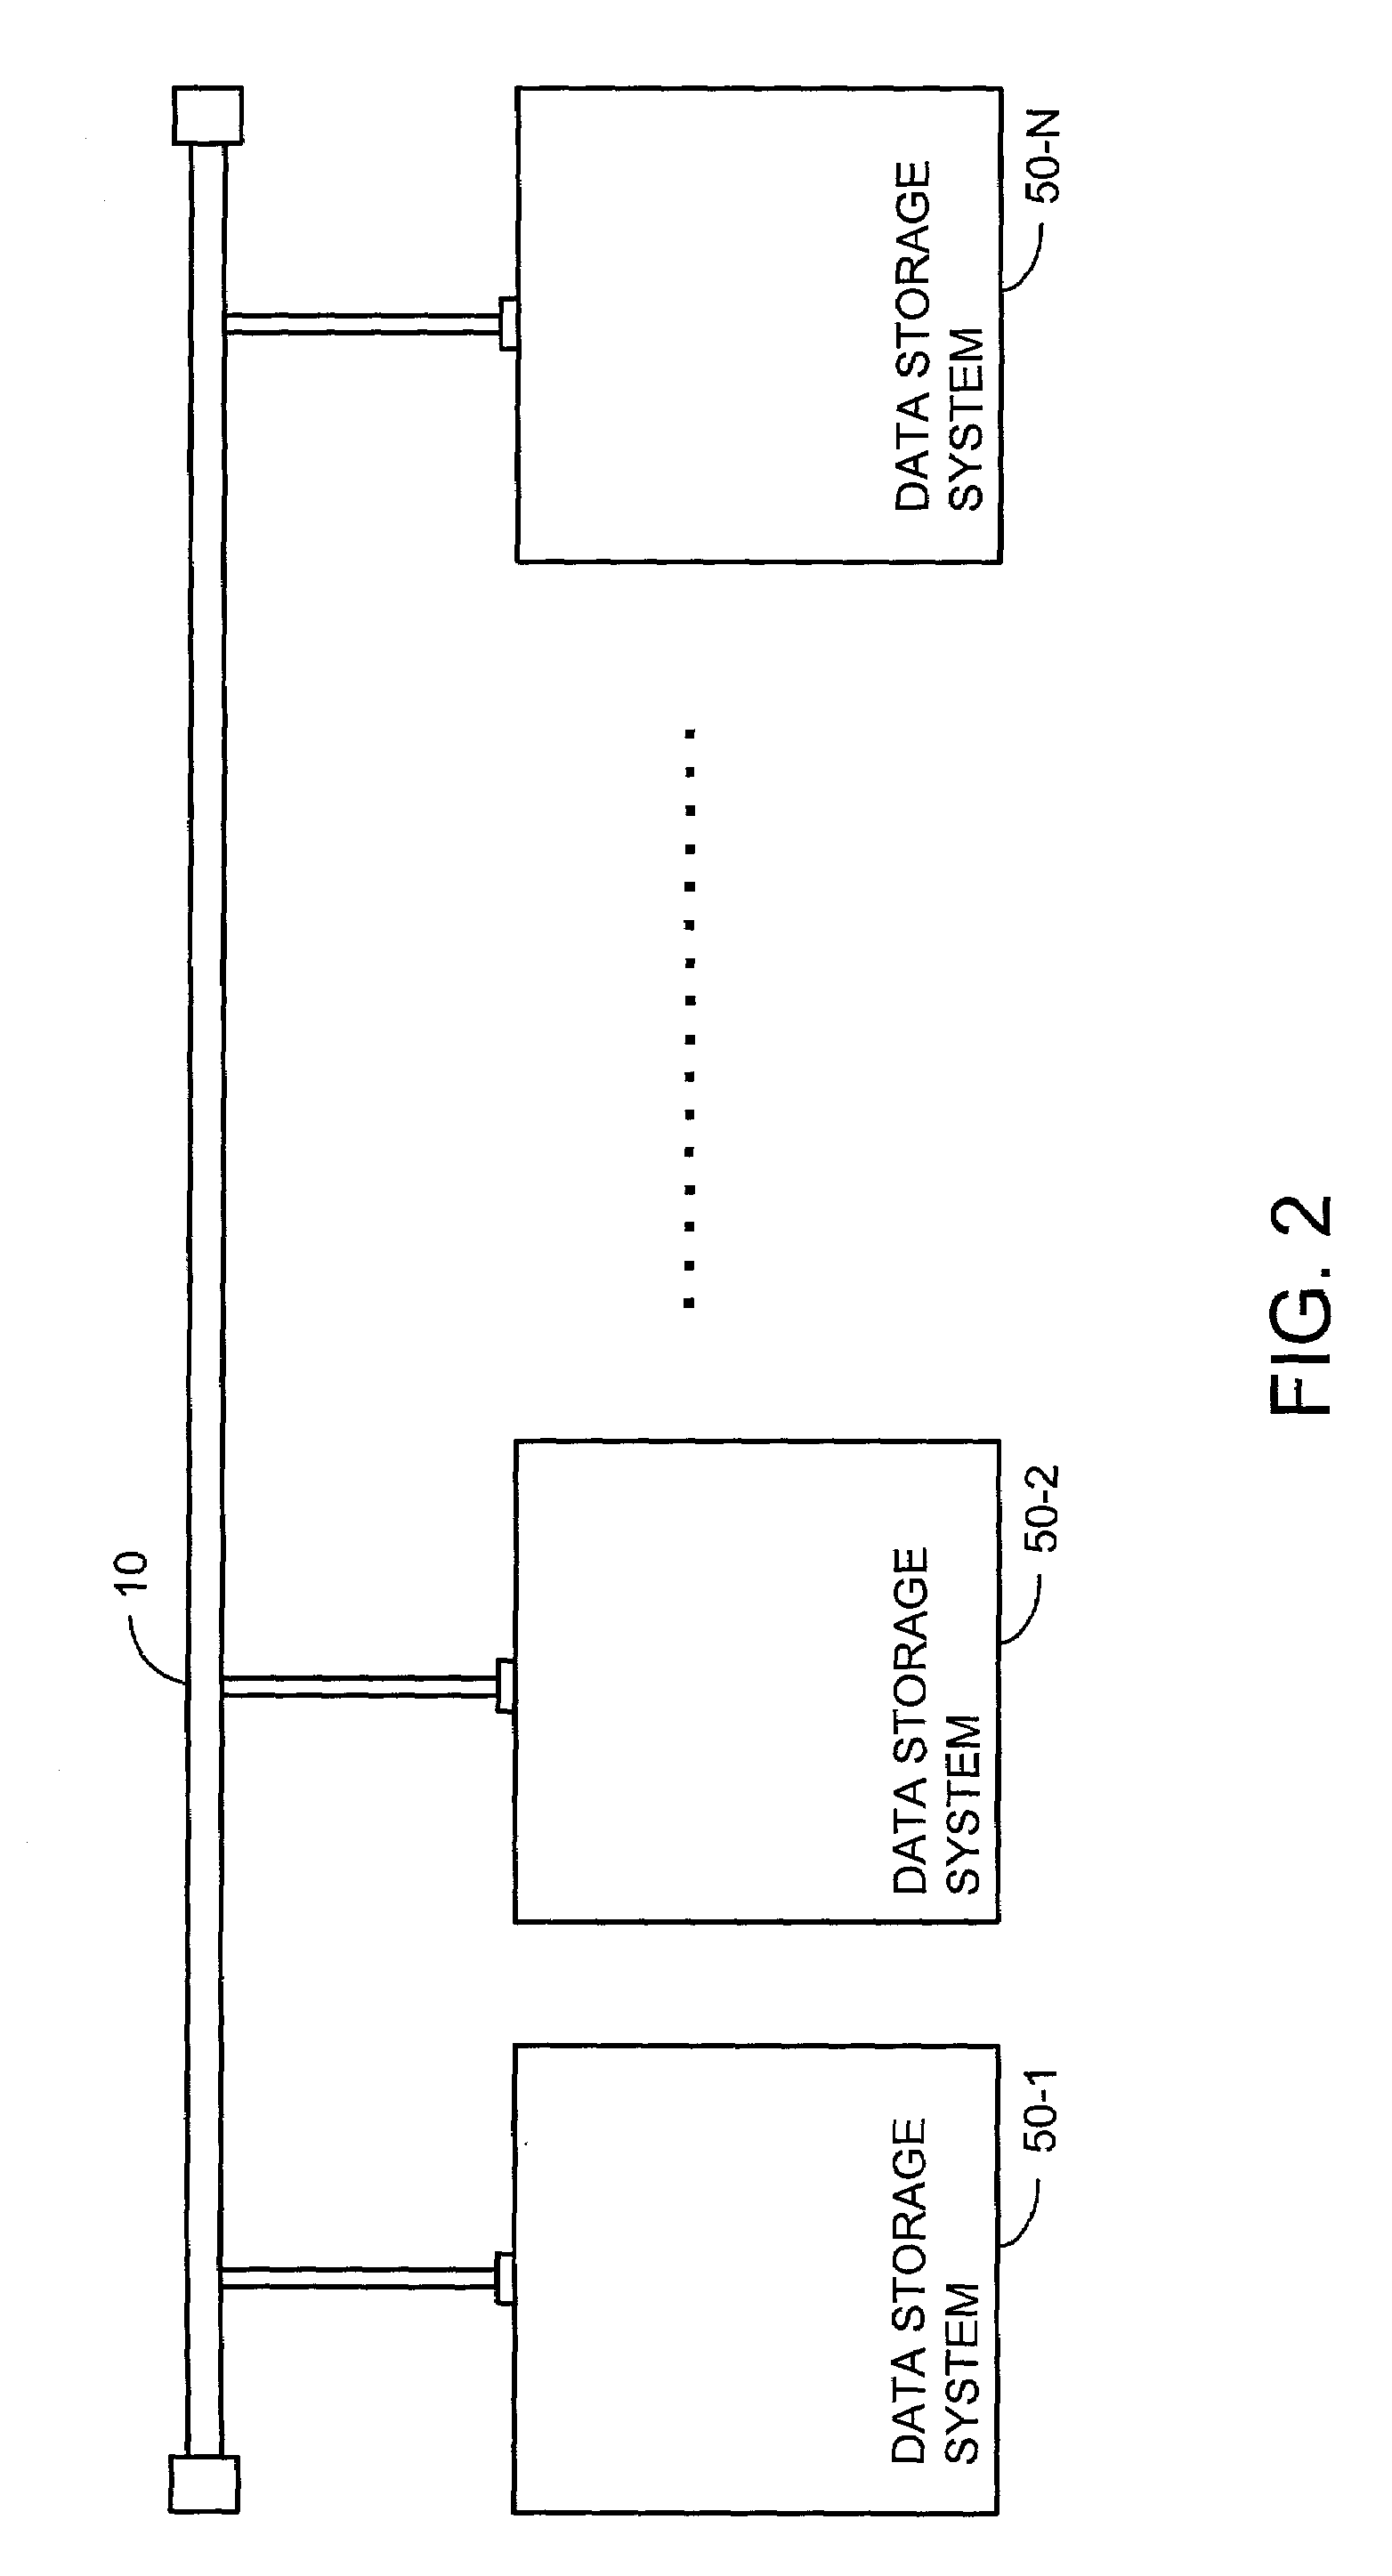 Method and apparatus for accessing memory using Ethernet packets